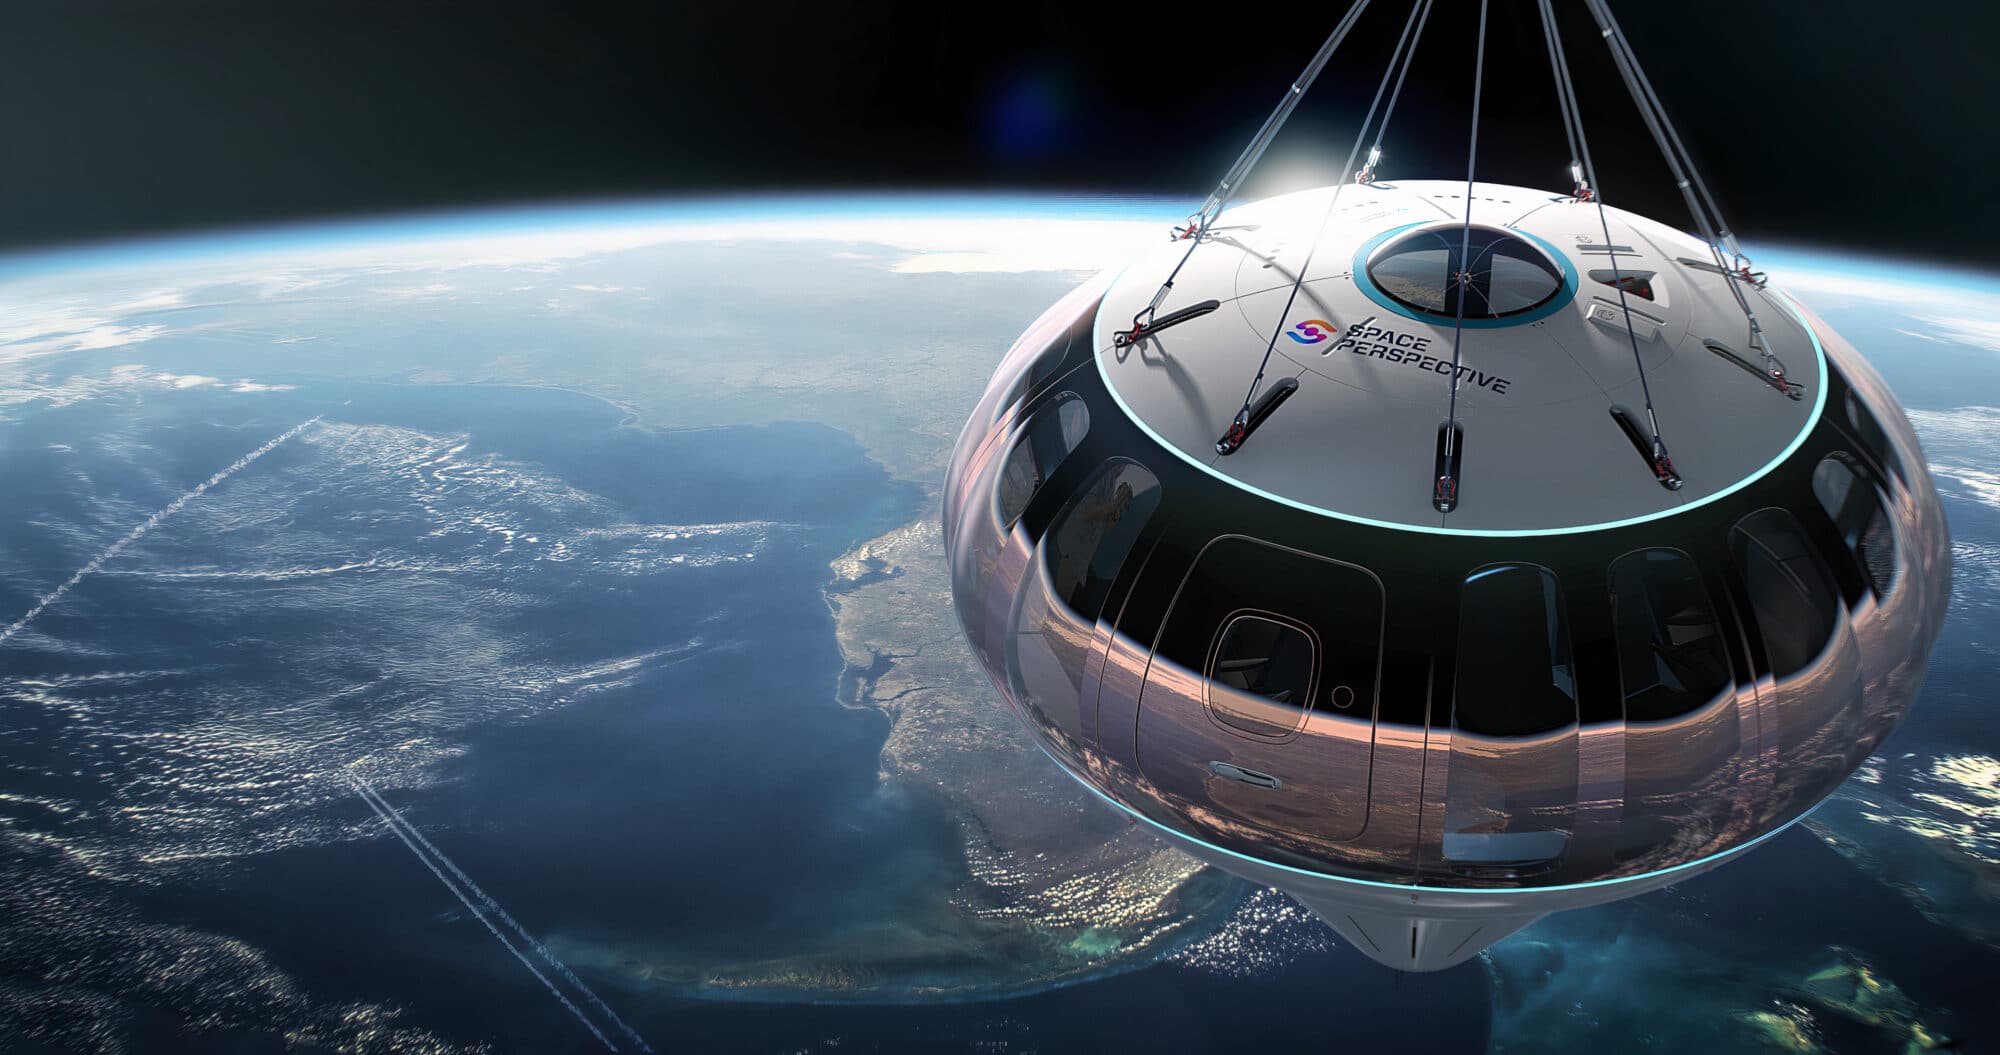 Space Perspective offers a radically gentle journey 20 miles above Space Perspective raises $40M Series A